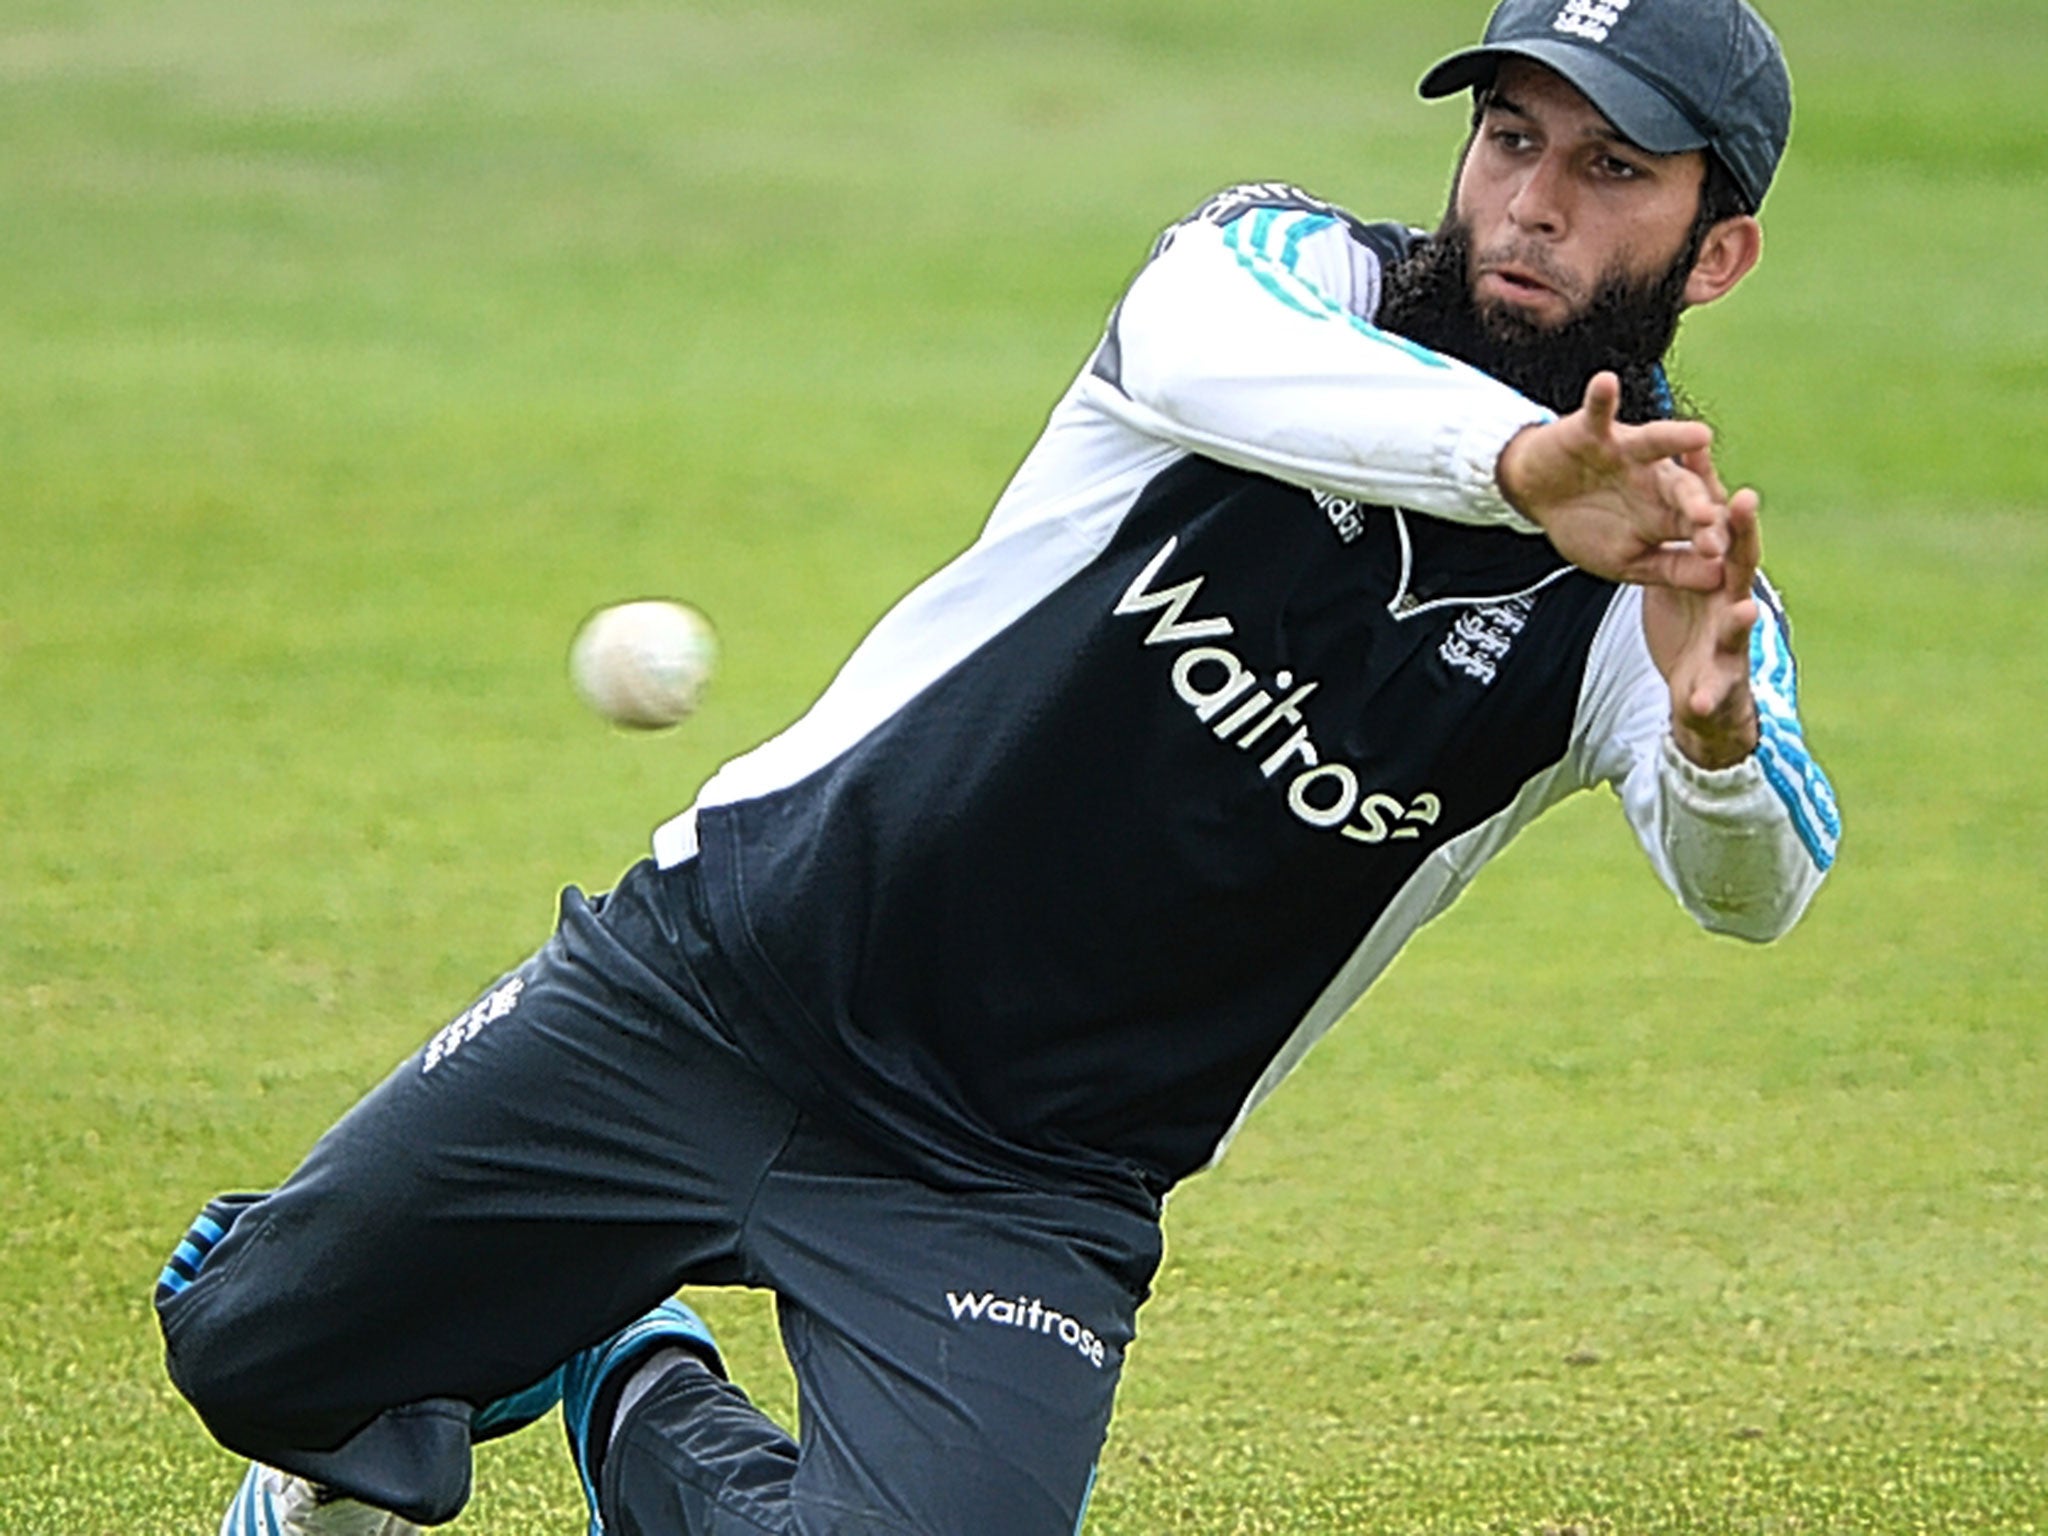 Moeen Ali prepares to take a catch during practice at Headingley